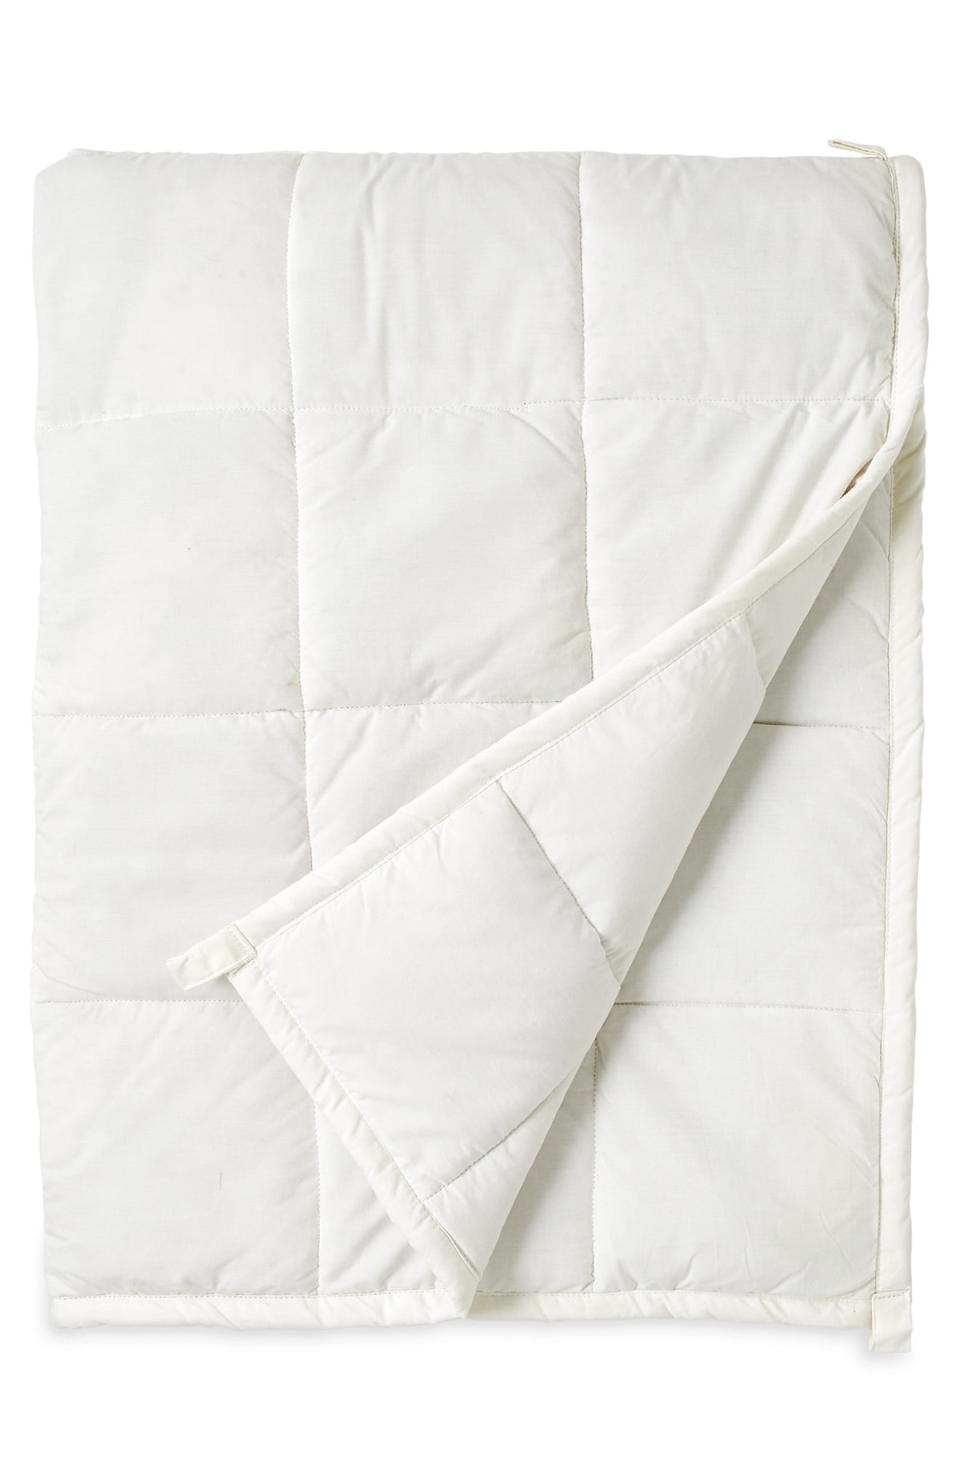 8) Embrace Weighted Blanket